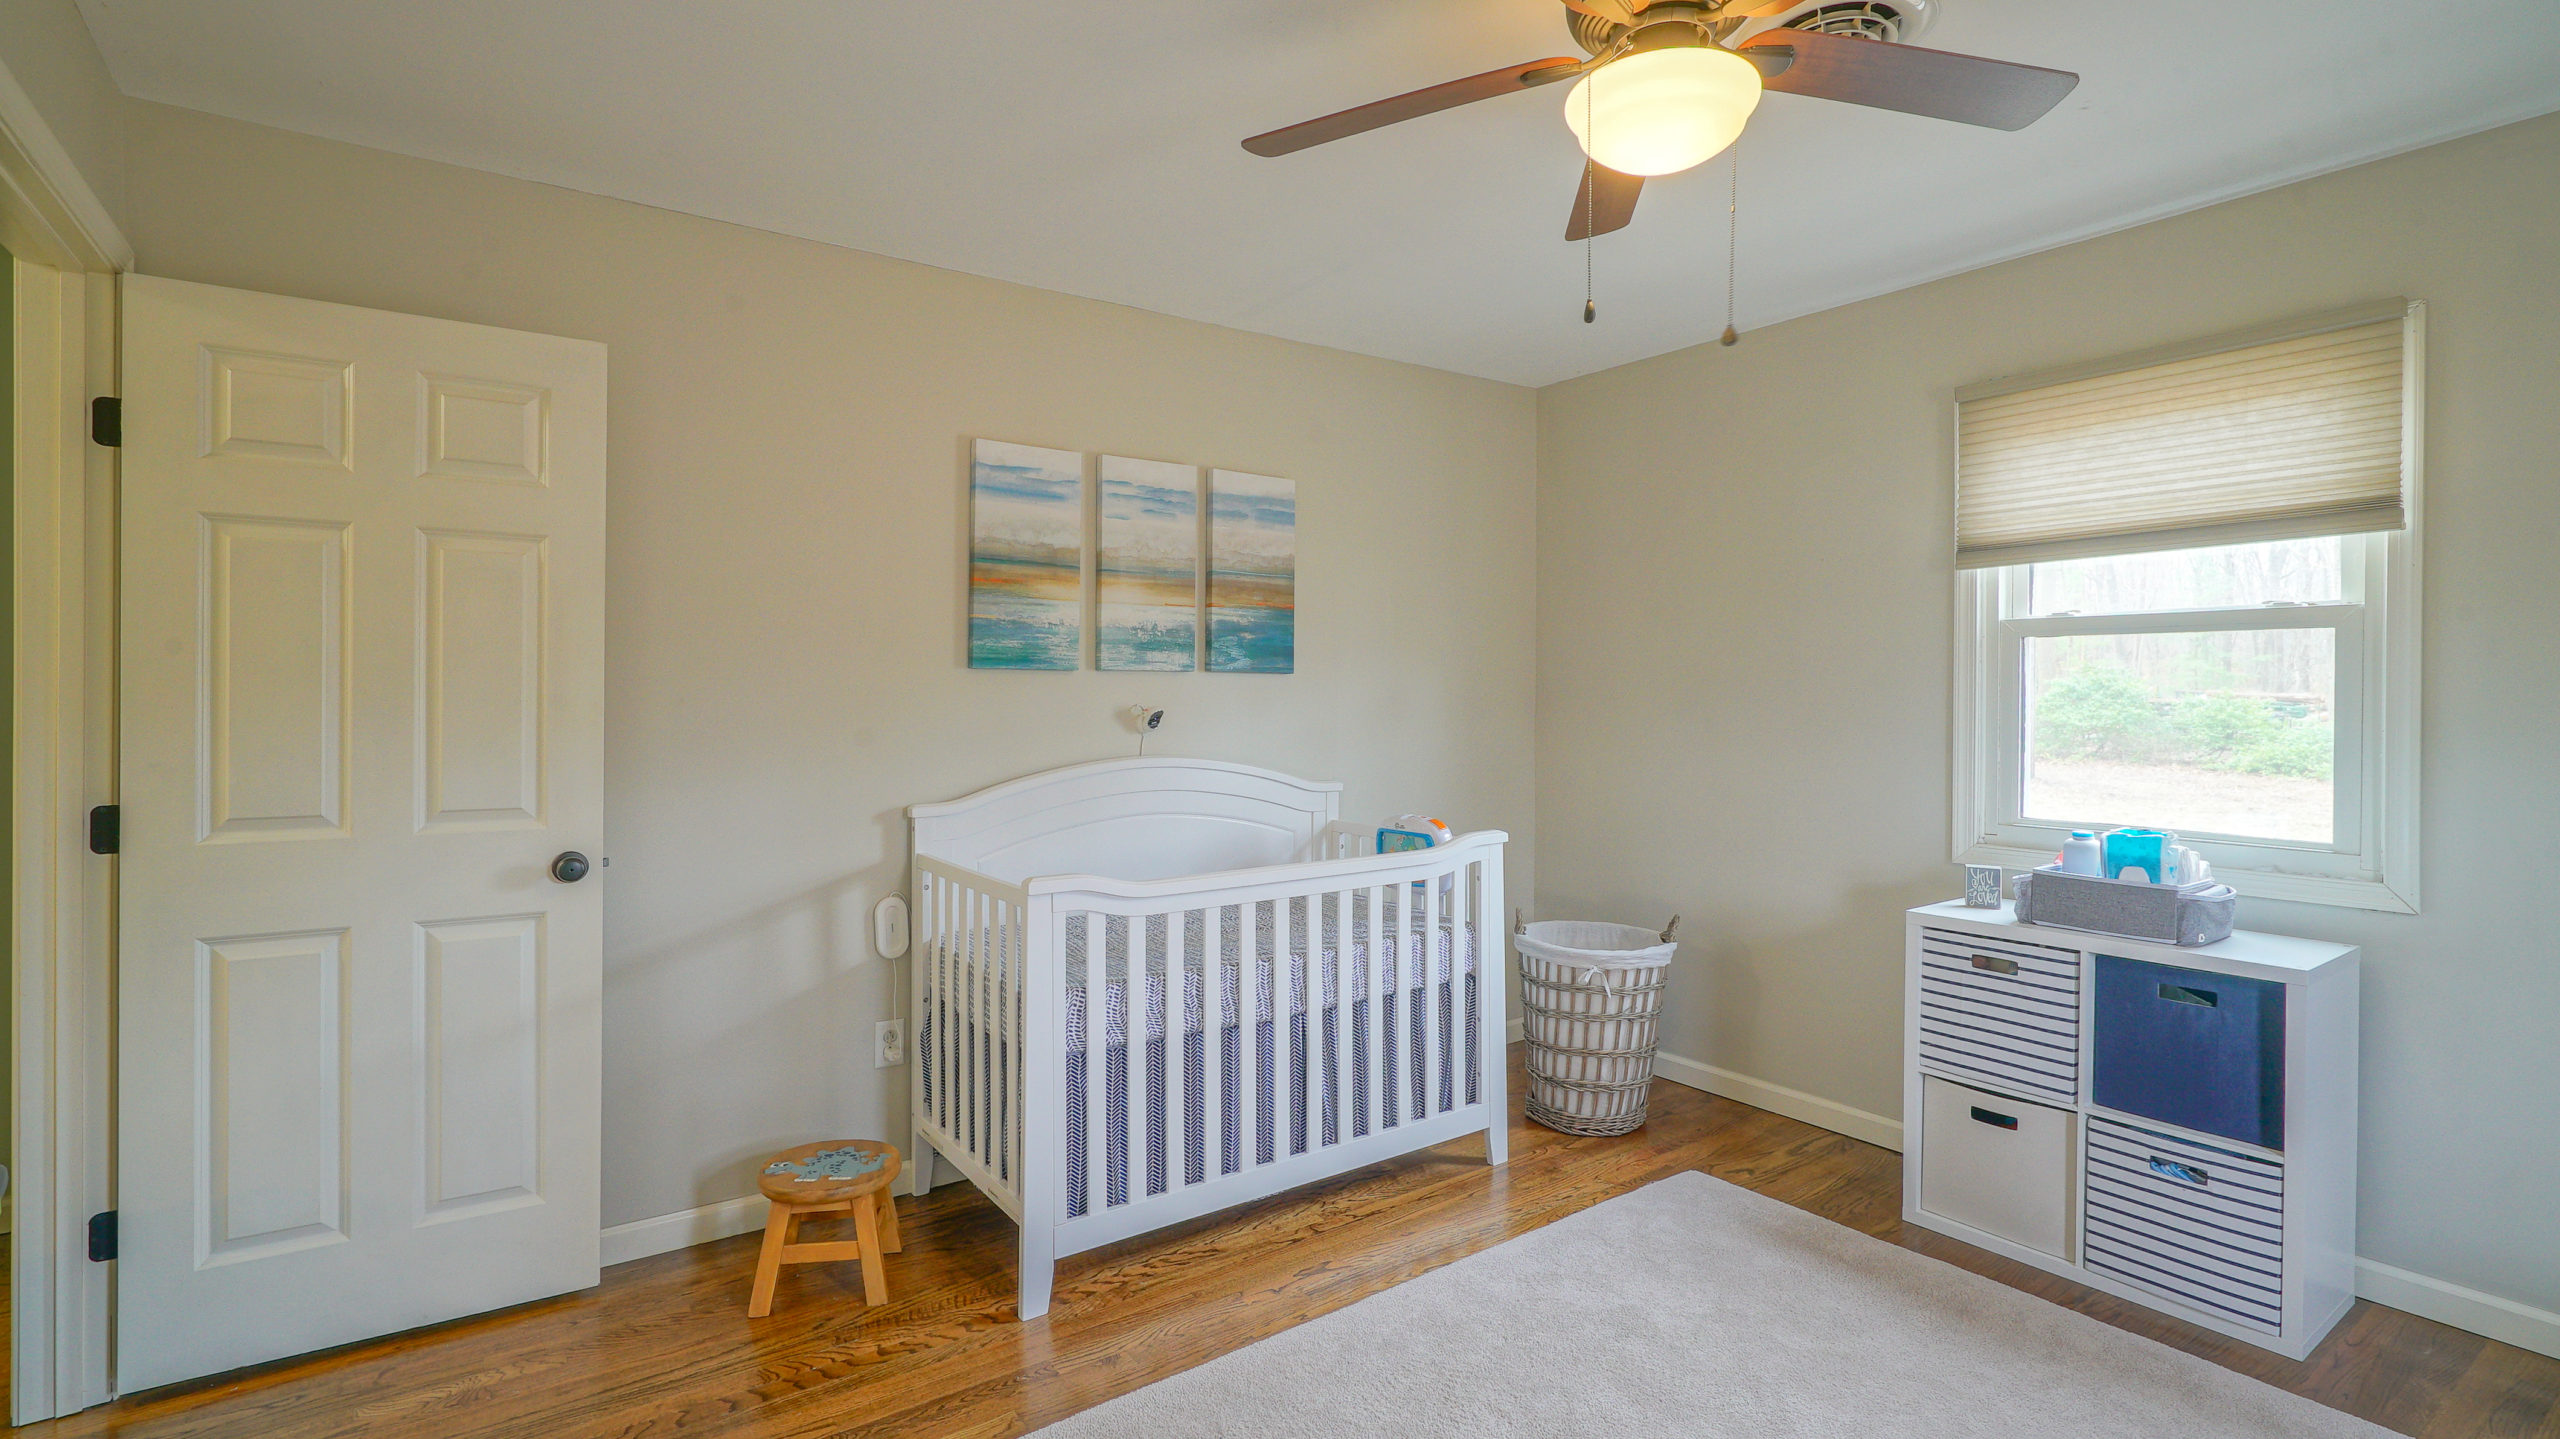 View of Nursery in Chestertown Maryland House for Sale